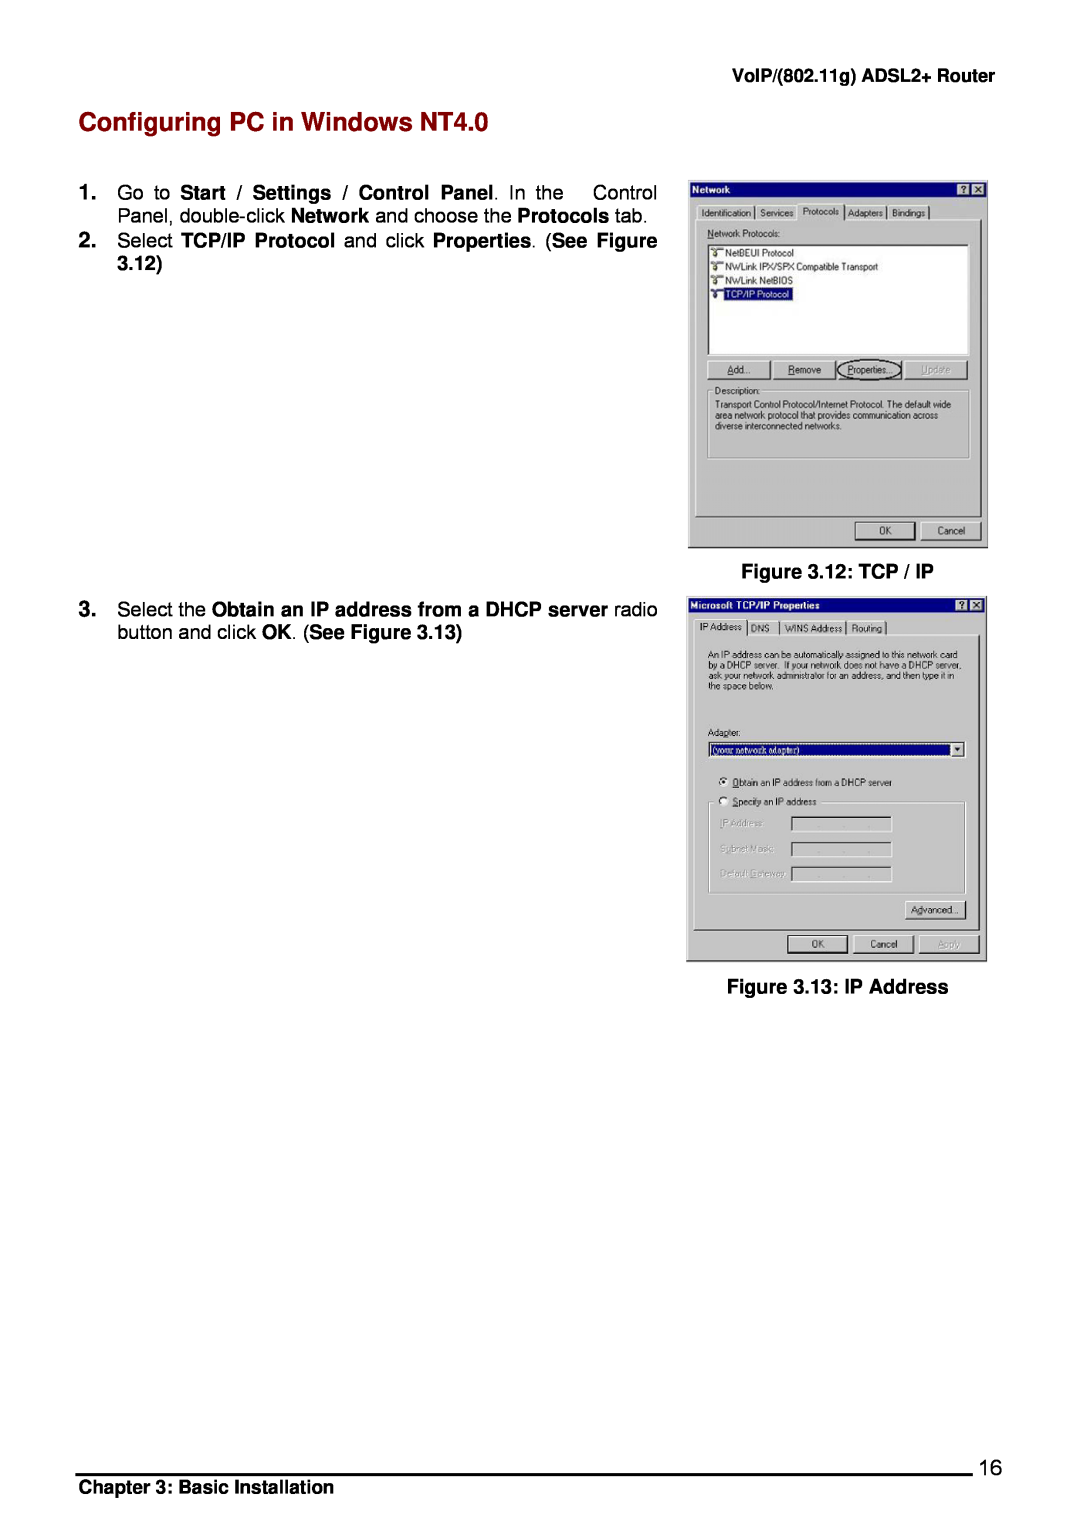 Billion Electric Company 7402VL Configuring PC in Windows NT4.0, Select TCP/IP Protocol and click Properties. See Figure 